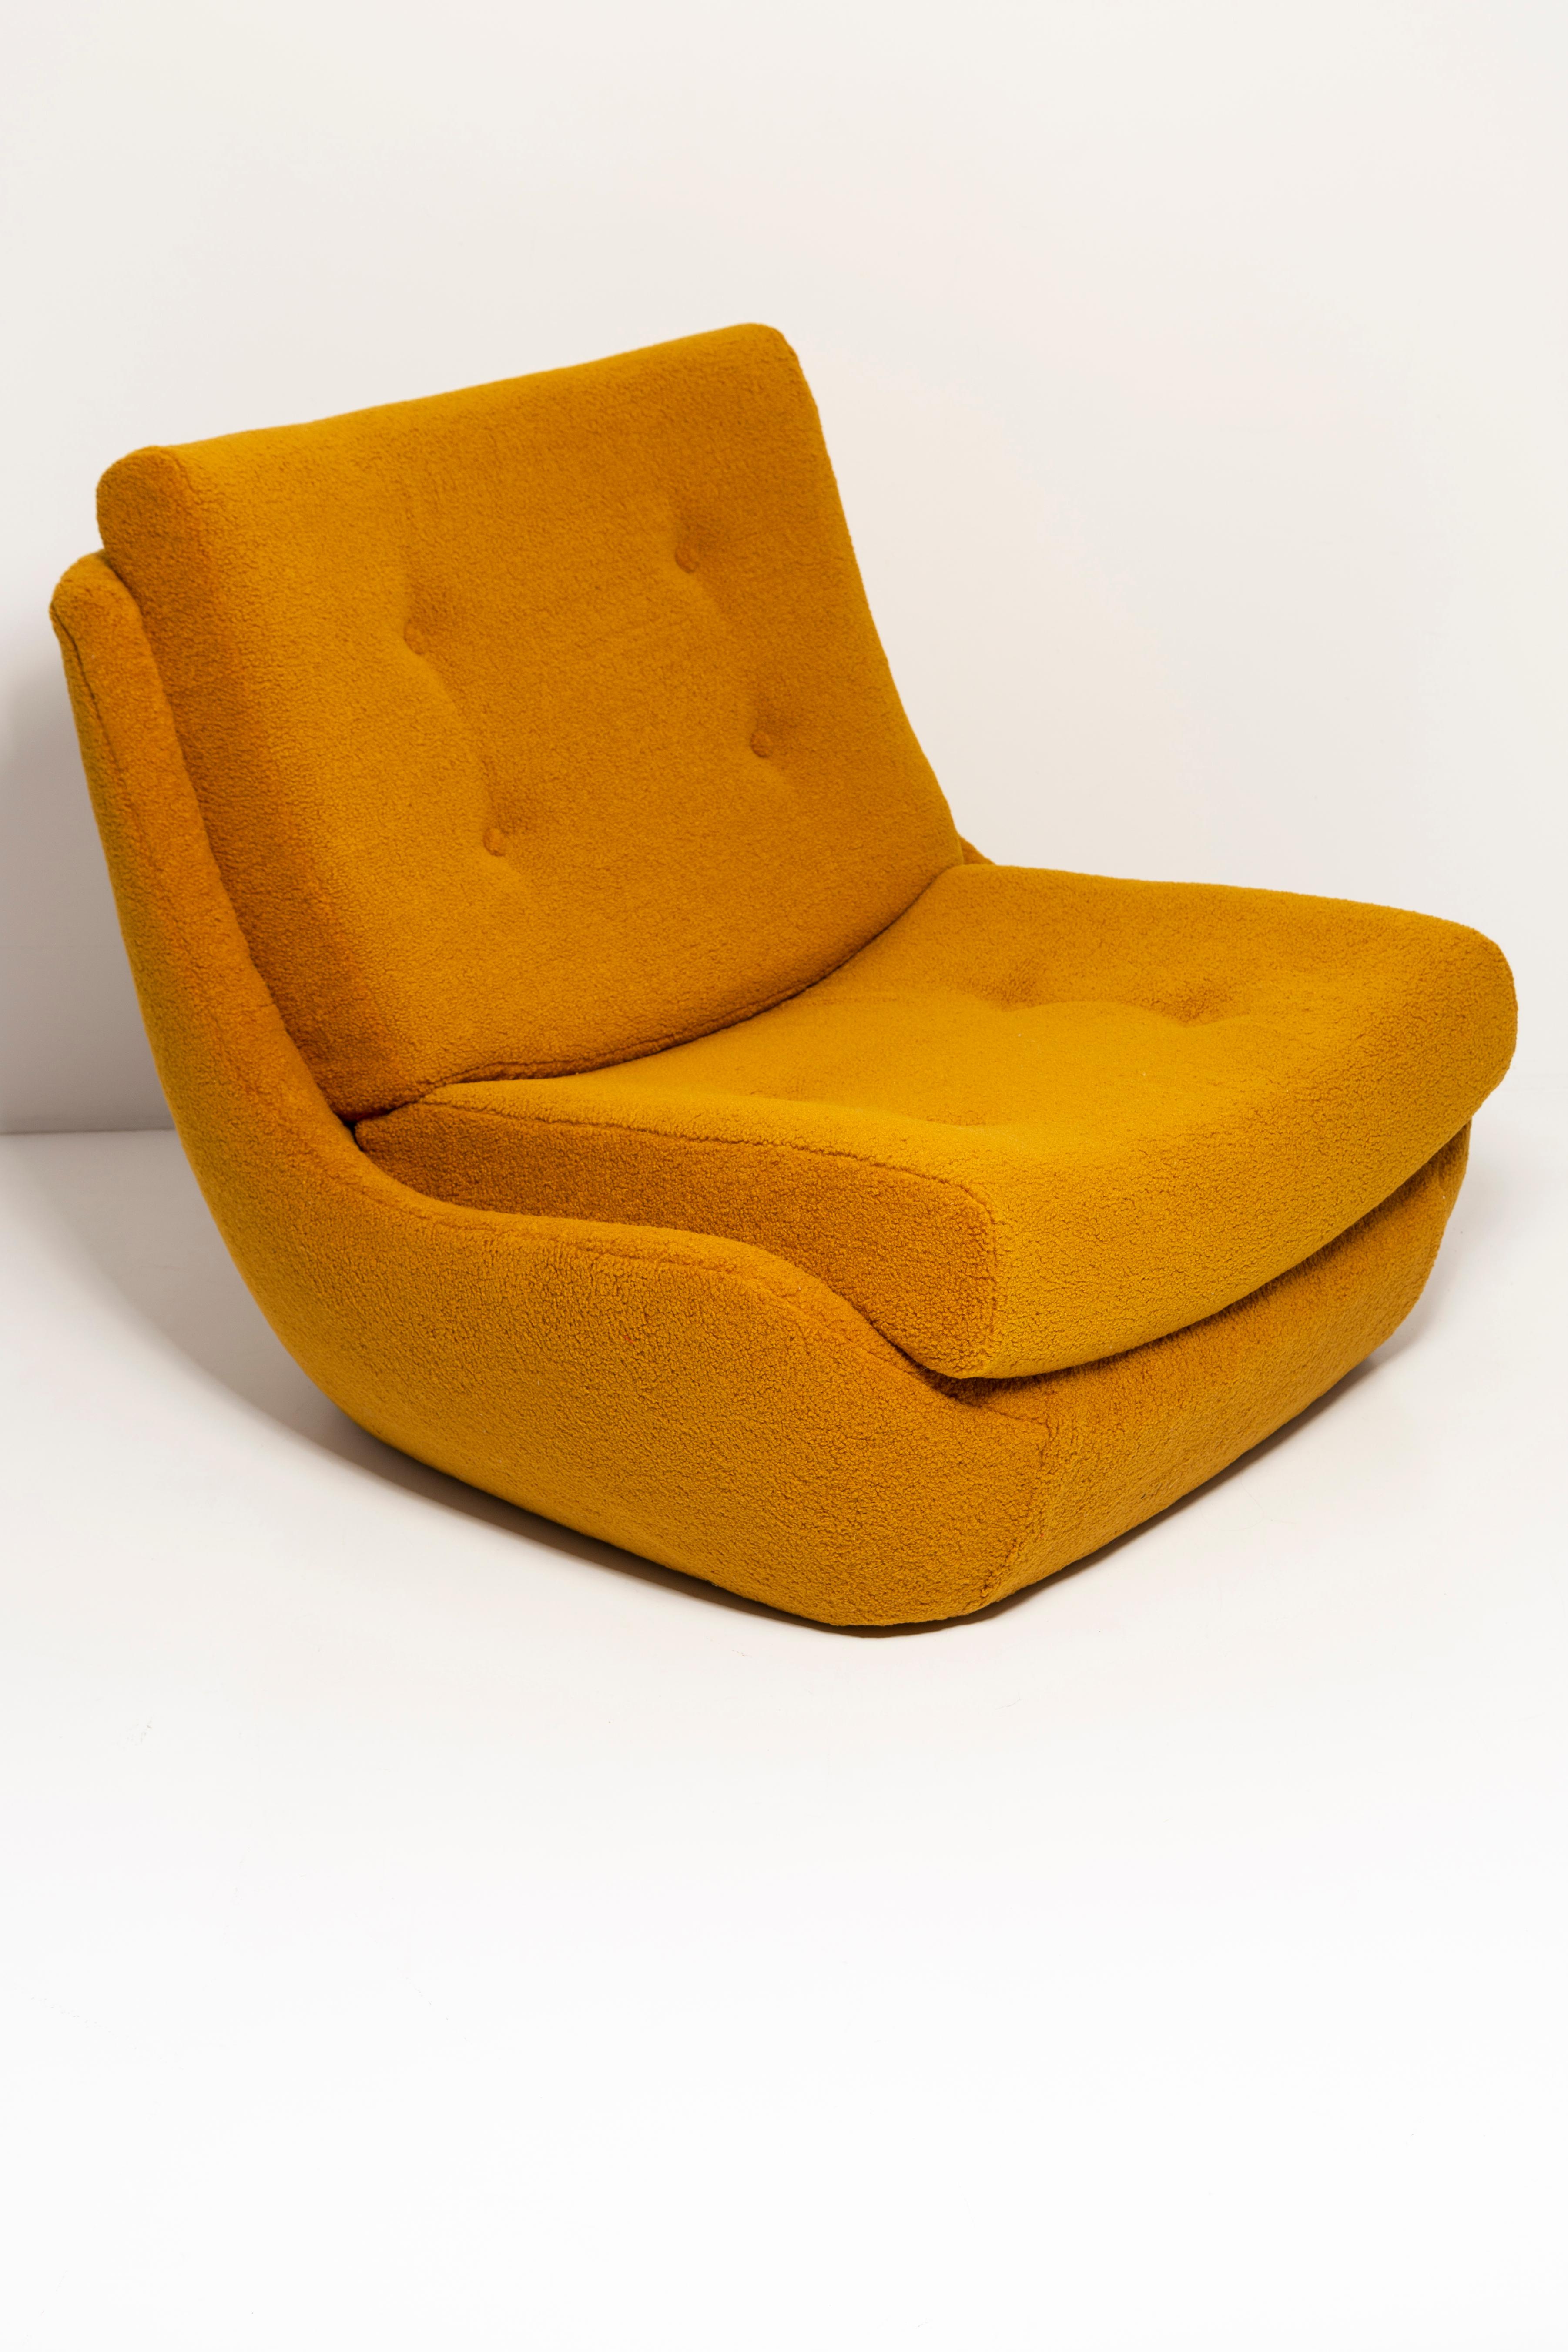 Atlantis armchair from the 1960s, produced in the Silesian furniture factory in Swiebodzin/Poland at the moment they are unique. 

Due to their dimensions, they perfectly blend in even in small apartments providing comfort and beautiful